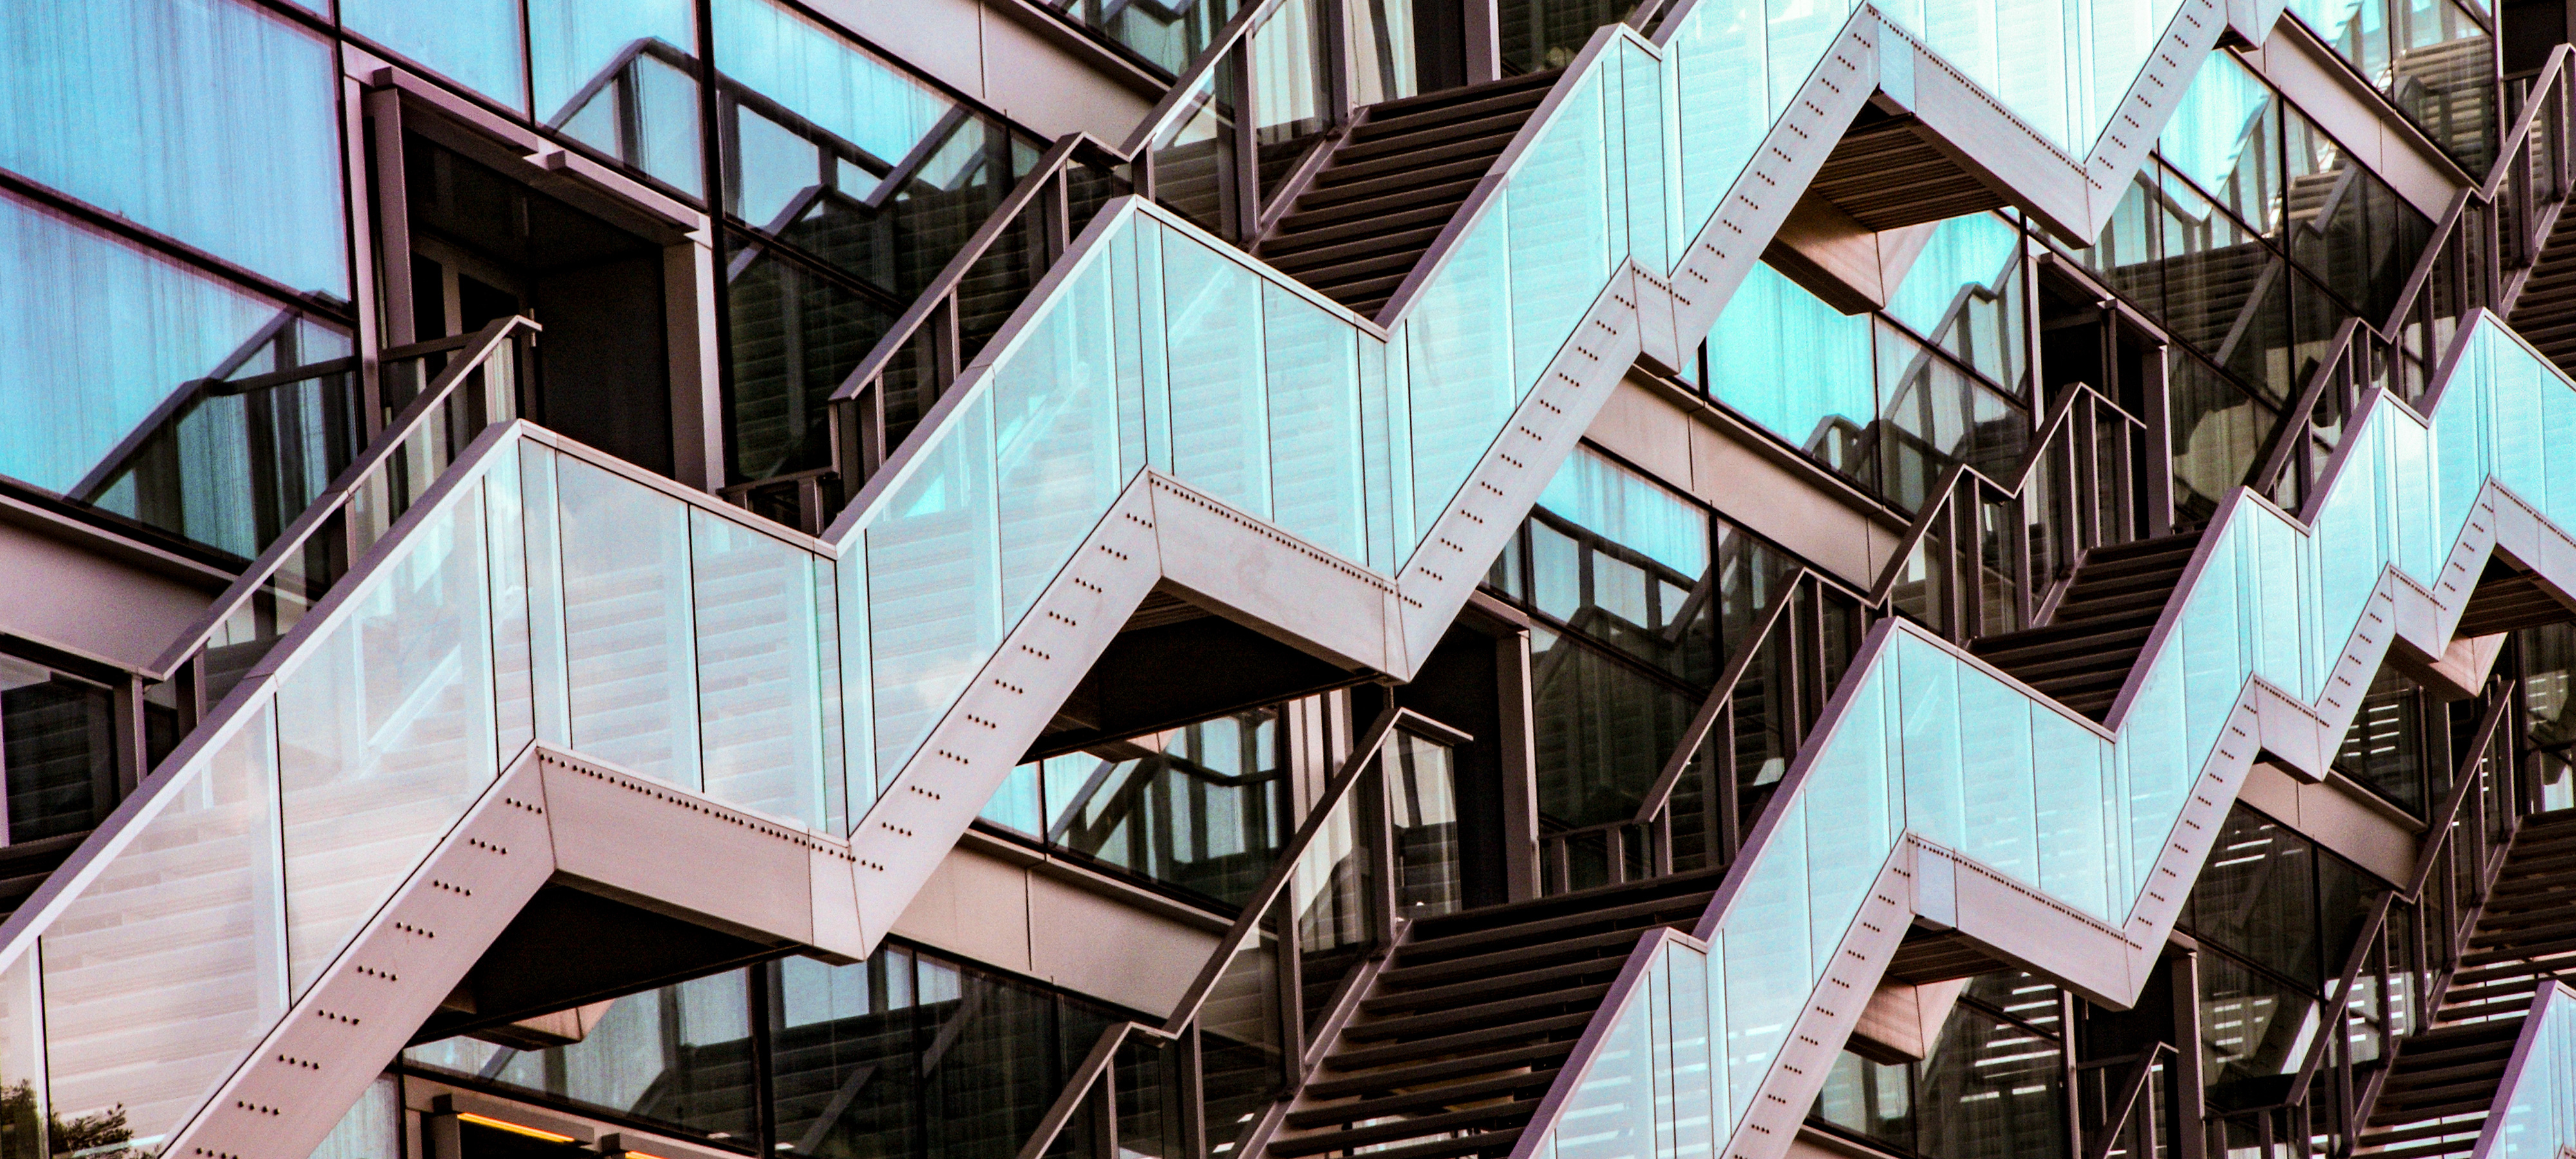 Staircases on the facade of a building.